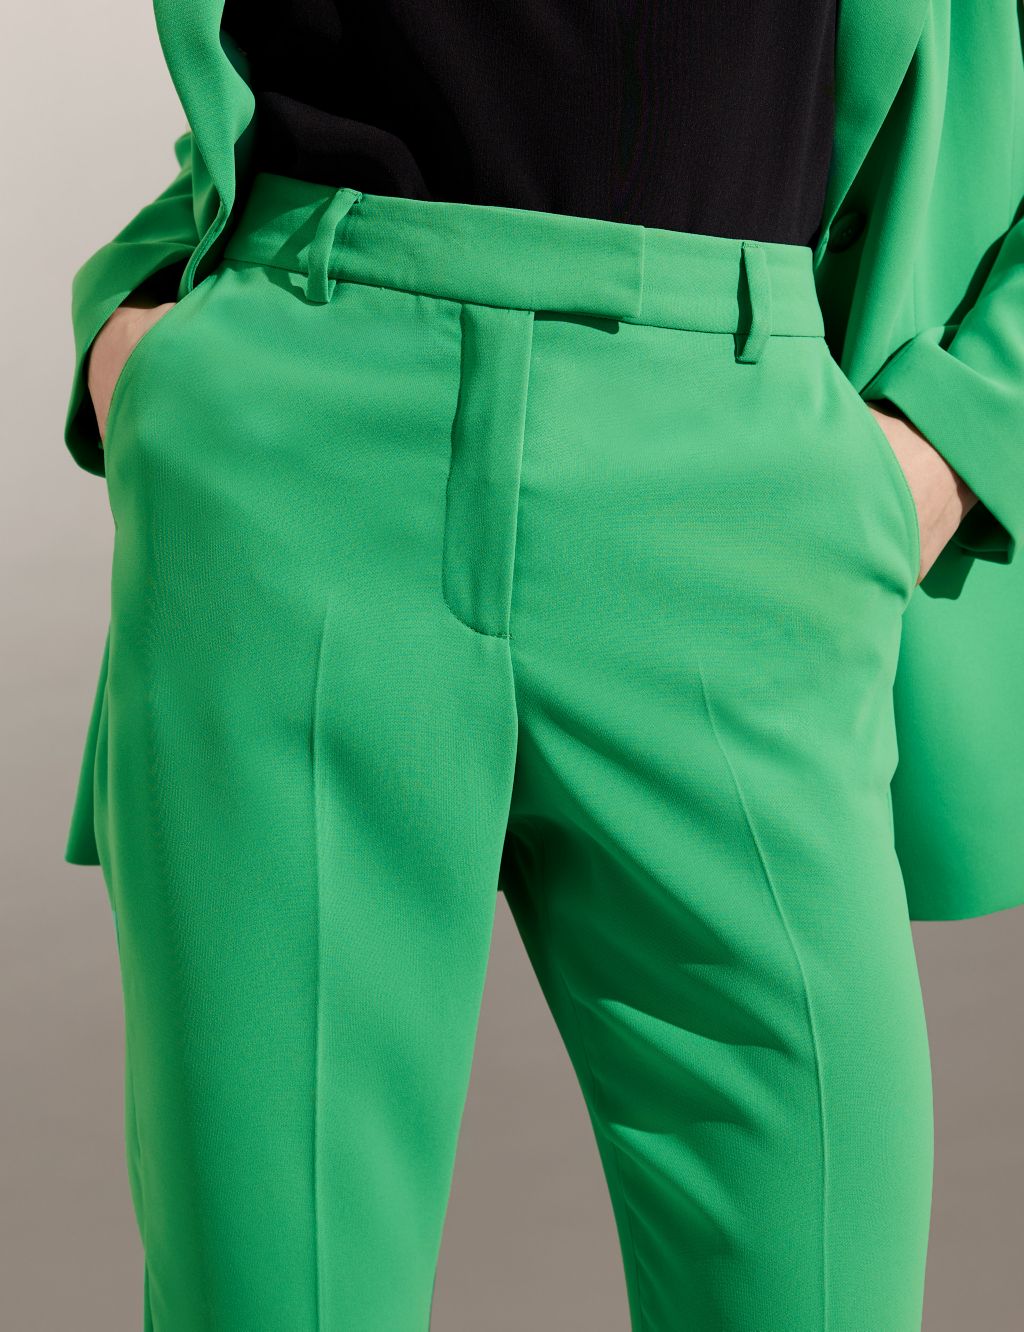 Crepe Straight Leg Ankle Grazer Trousers image 3